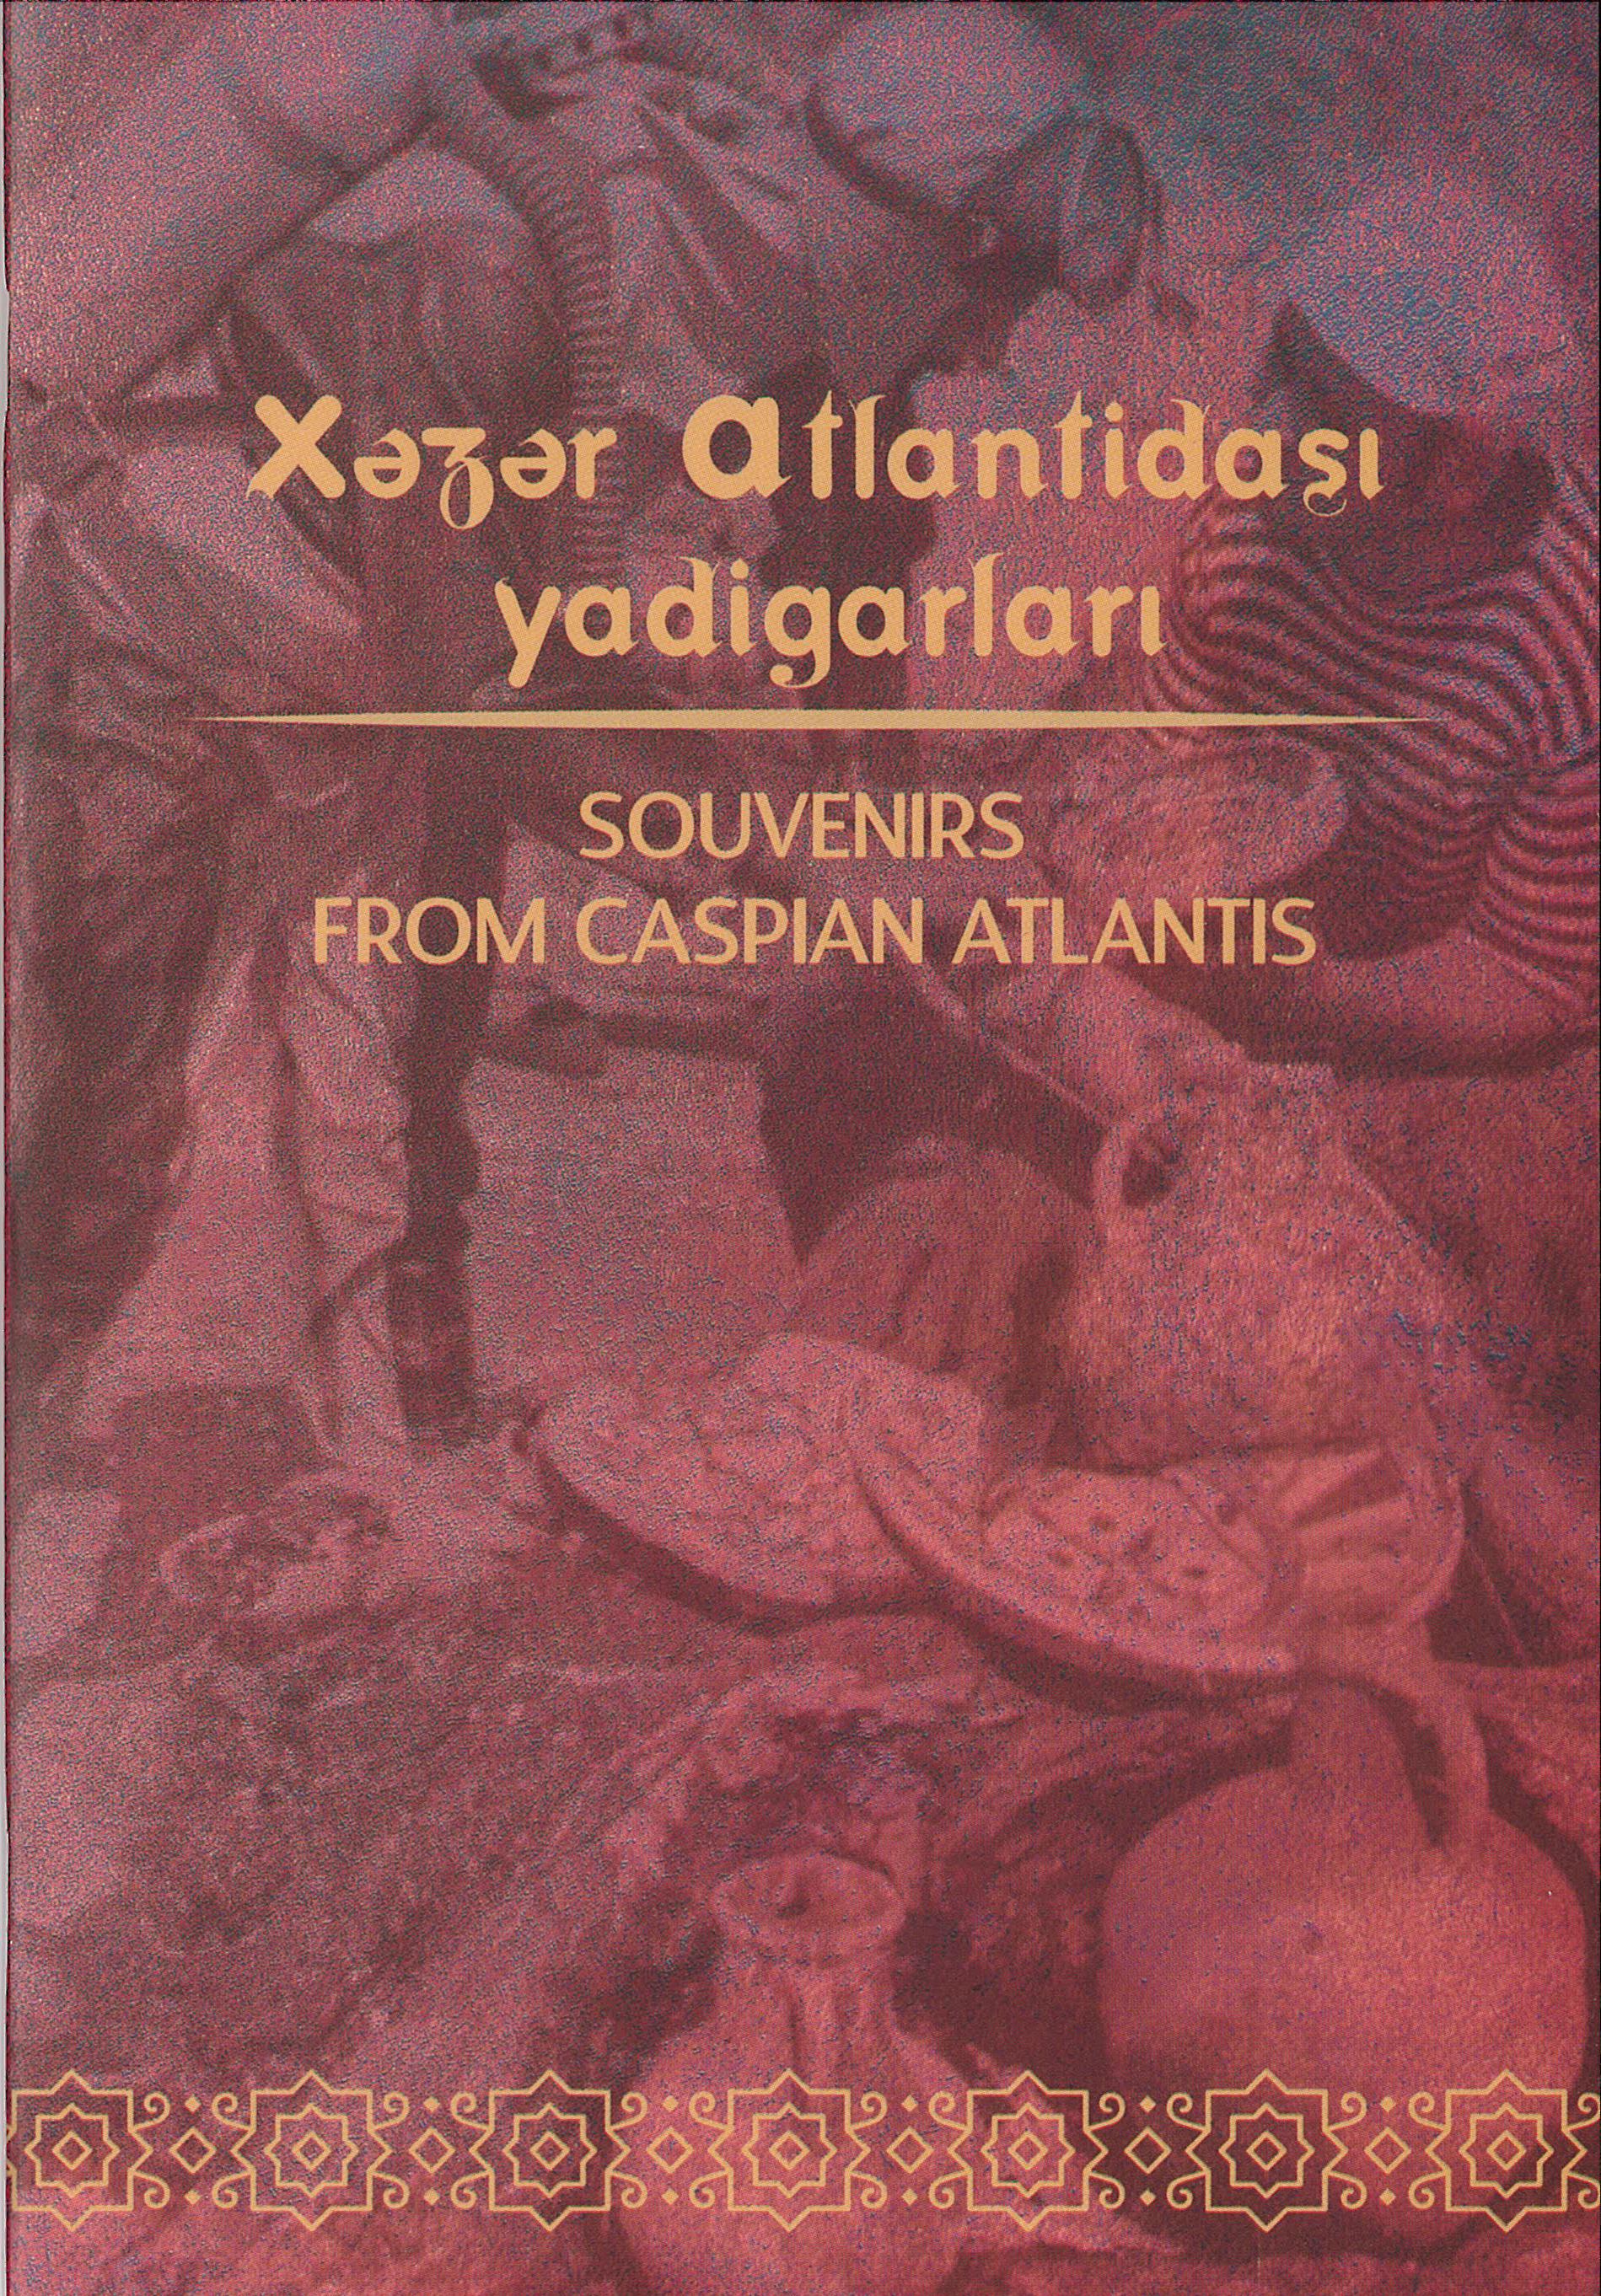  Souvenirs from from Caspian atlantis